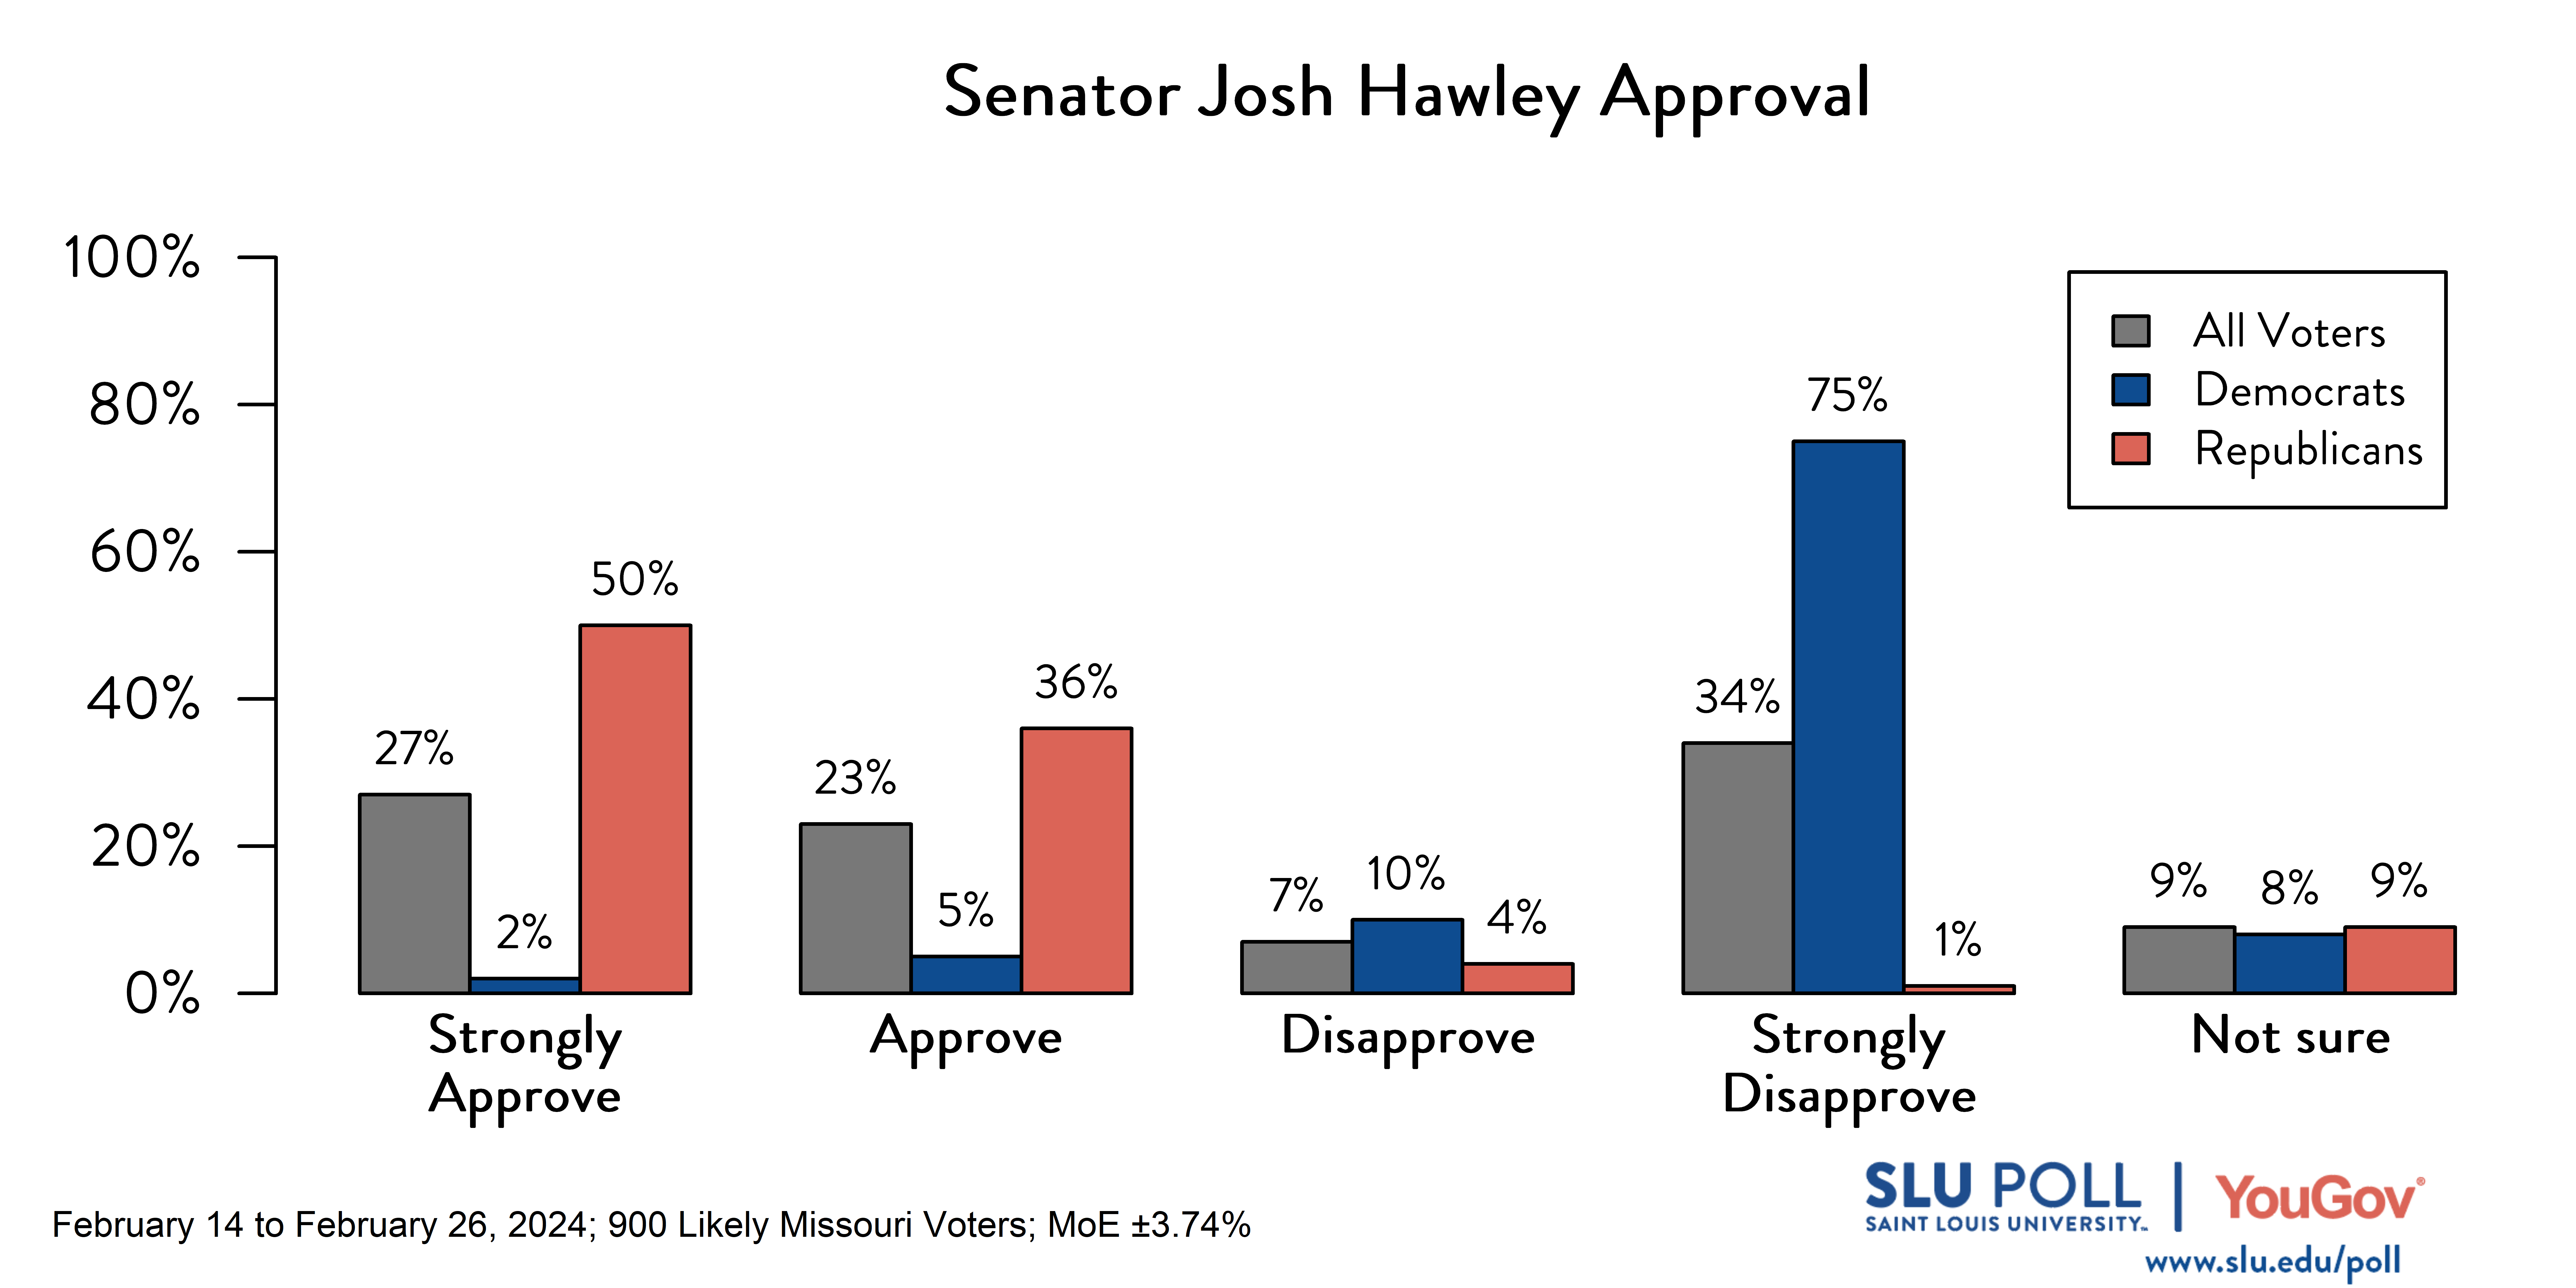 Likely voters' responses to 'Do you approve or disapprove of the way each is doing their job…Senator Josh Haley?': 27% Strongly approve, 23% Approve, 7% Disapprove, 34% Strongly disapprove, and 9% Not sure. Democratic voters' responses: ' 2% Strongly approve, 5% Approve, 10% Disapprove, 75% Strongly disapprove, and 8% Not sure. Republican voters' responses:  50% Strongly approve, 36% Approve, 4% Disapprove, 1% Strongly disapprove, and 9% Not sure.